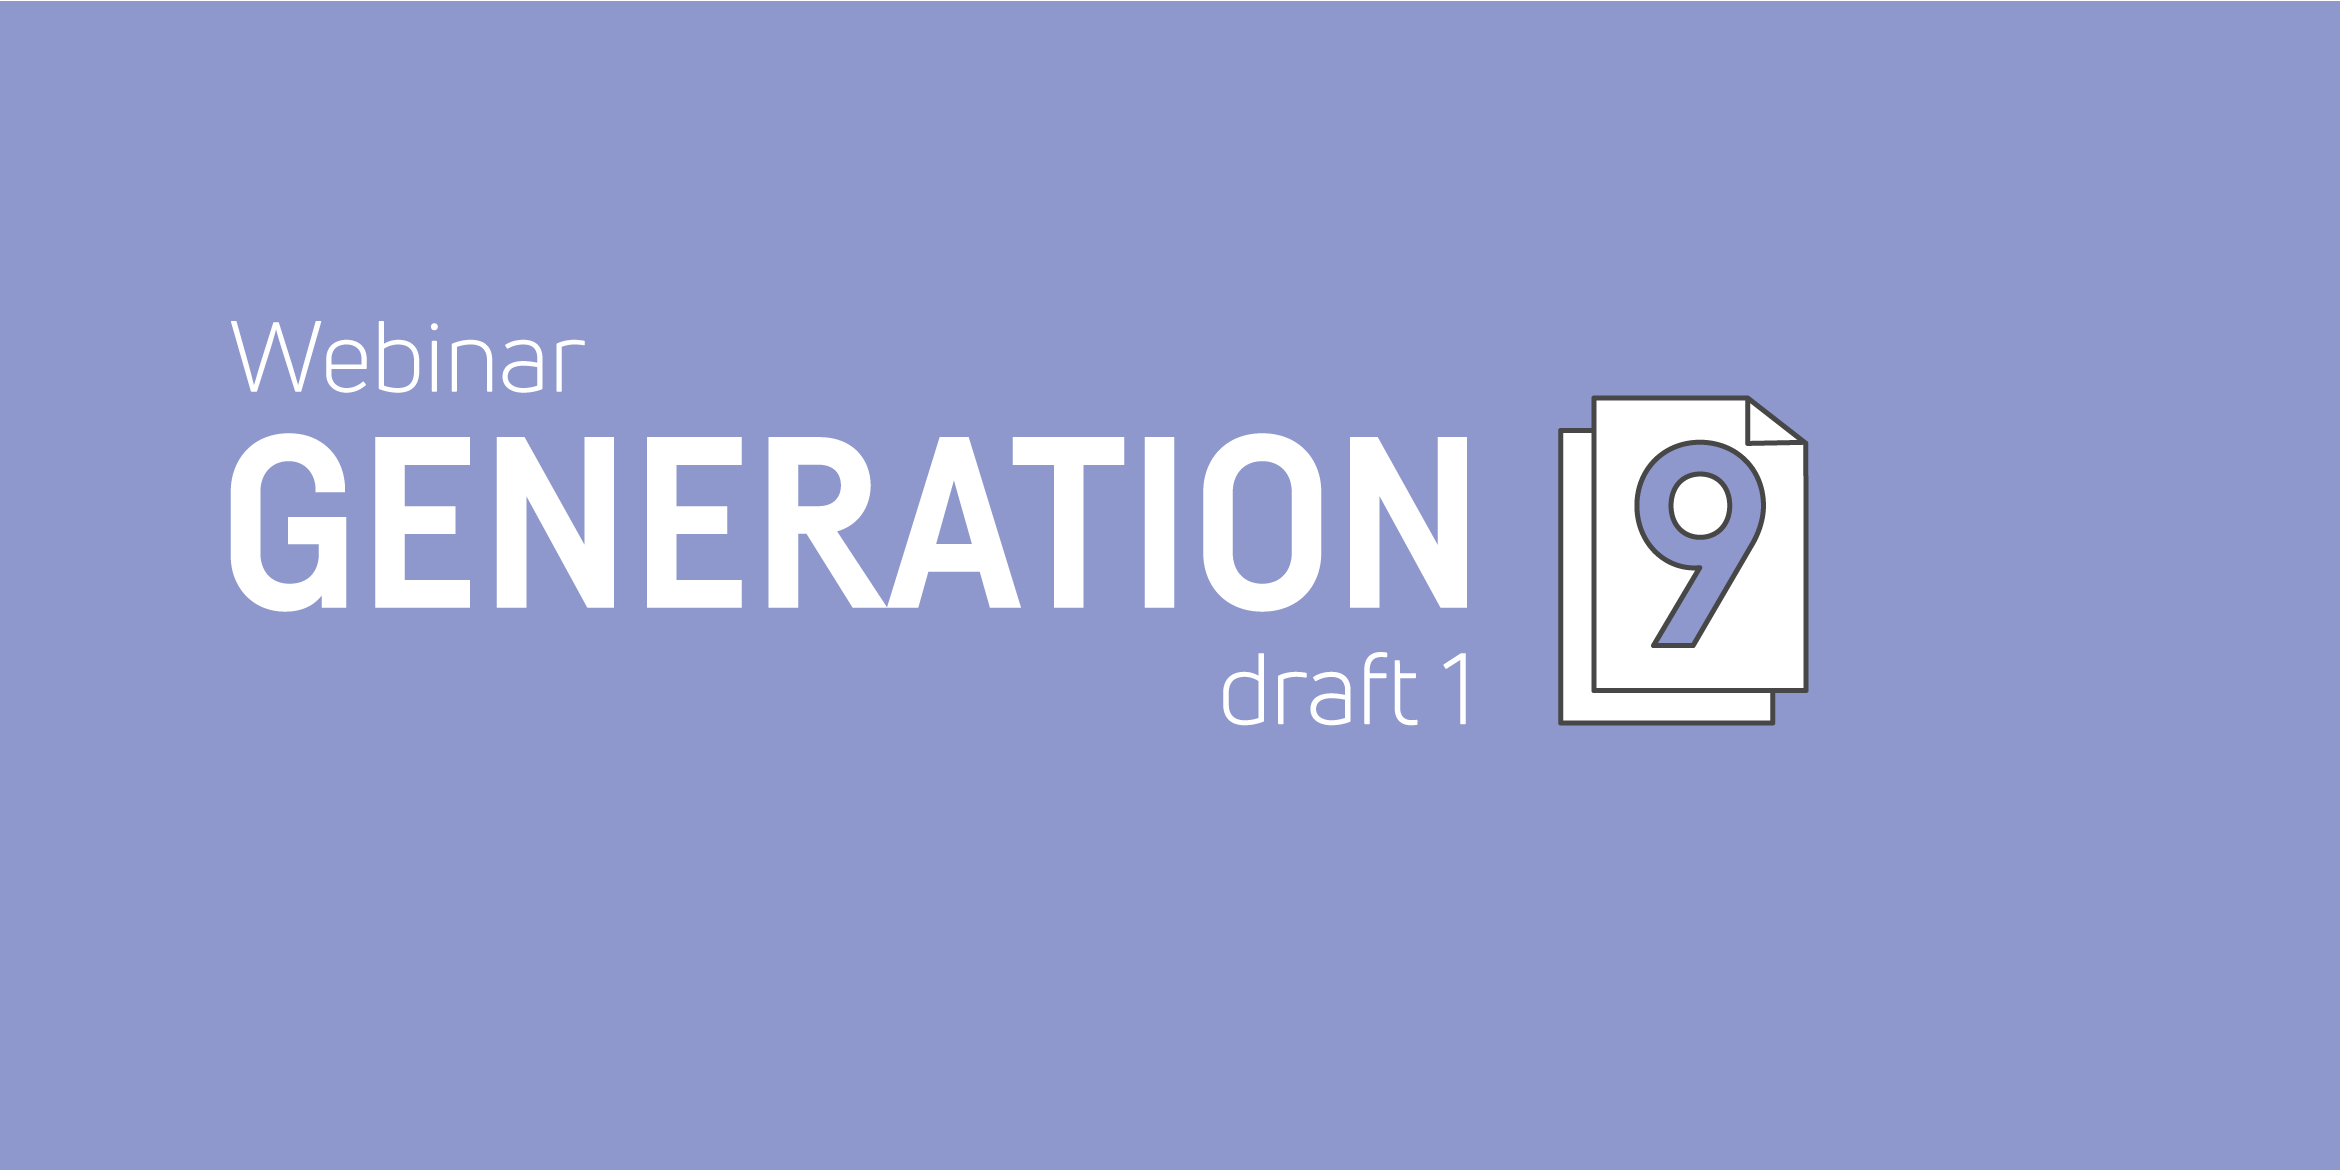 Webinar: Presenting the first draft of TCO Certified, generation 9